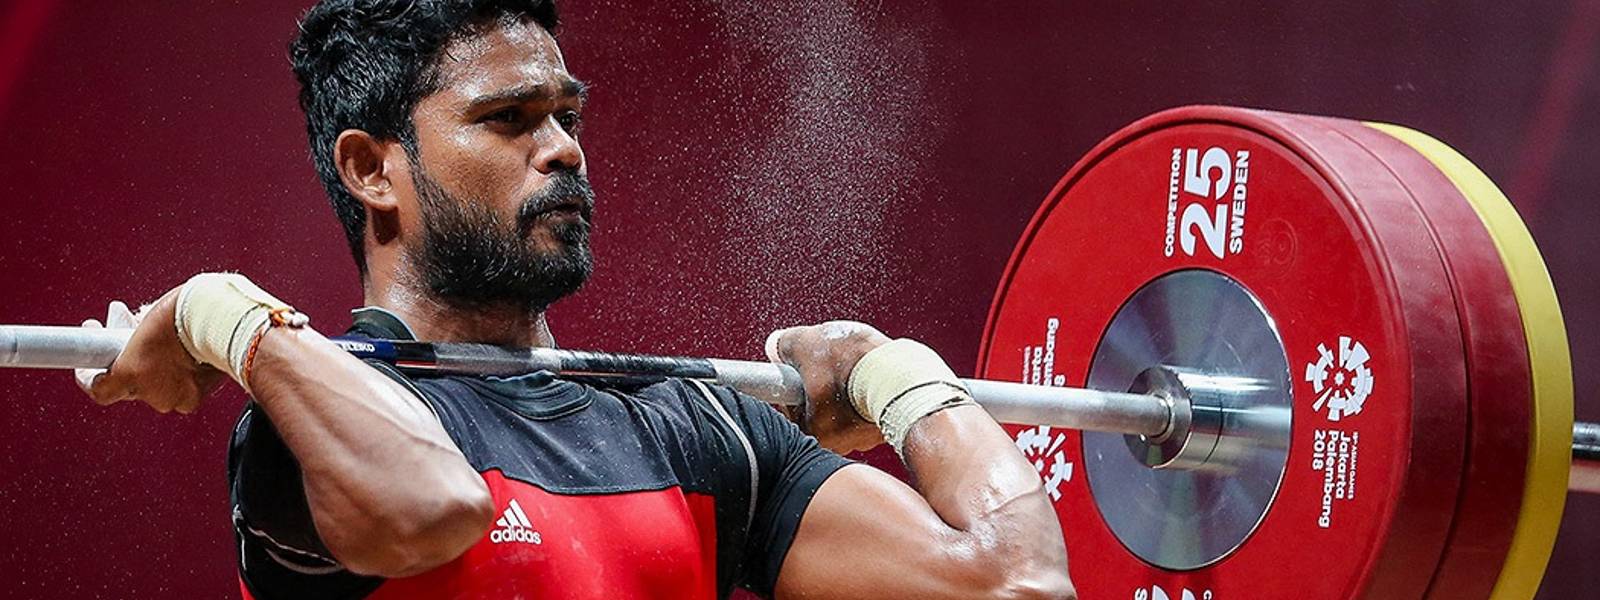 Sri Lanka clinches another gold at Singapore weightlifting championships